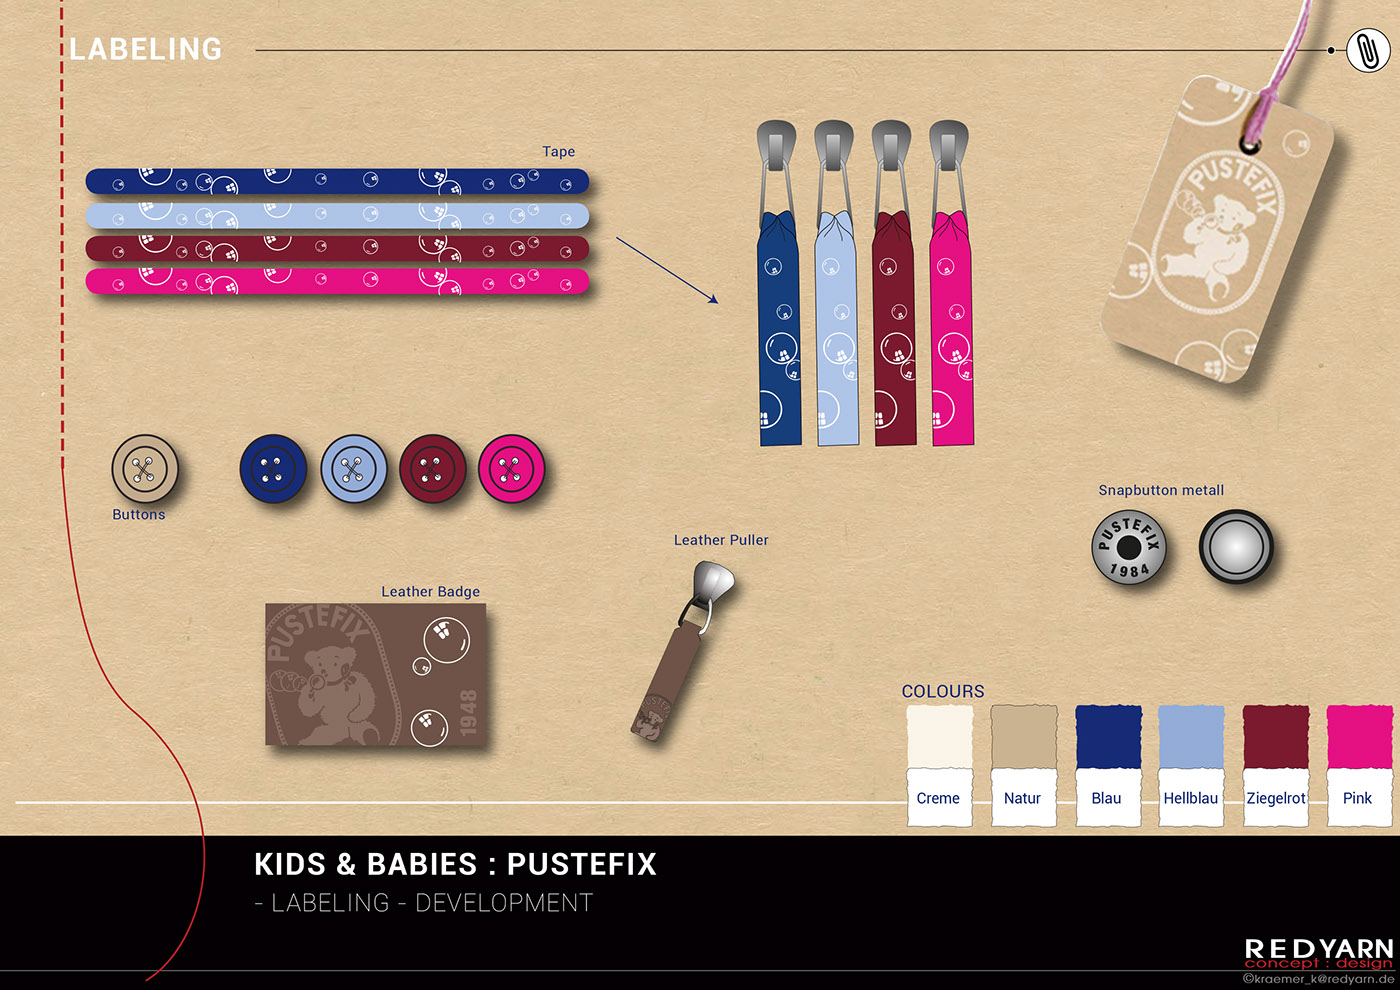 kidswear babieswear moodboards COLOURCONCEPT graphics illustrations products